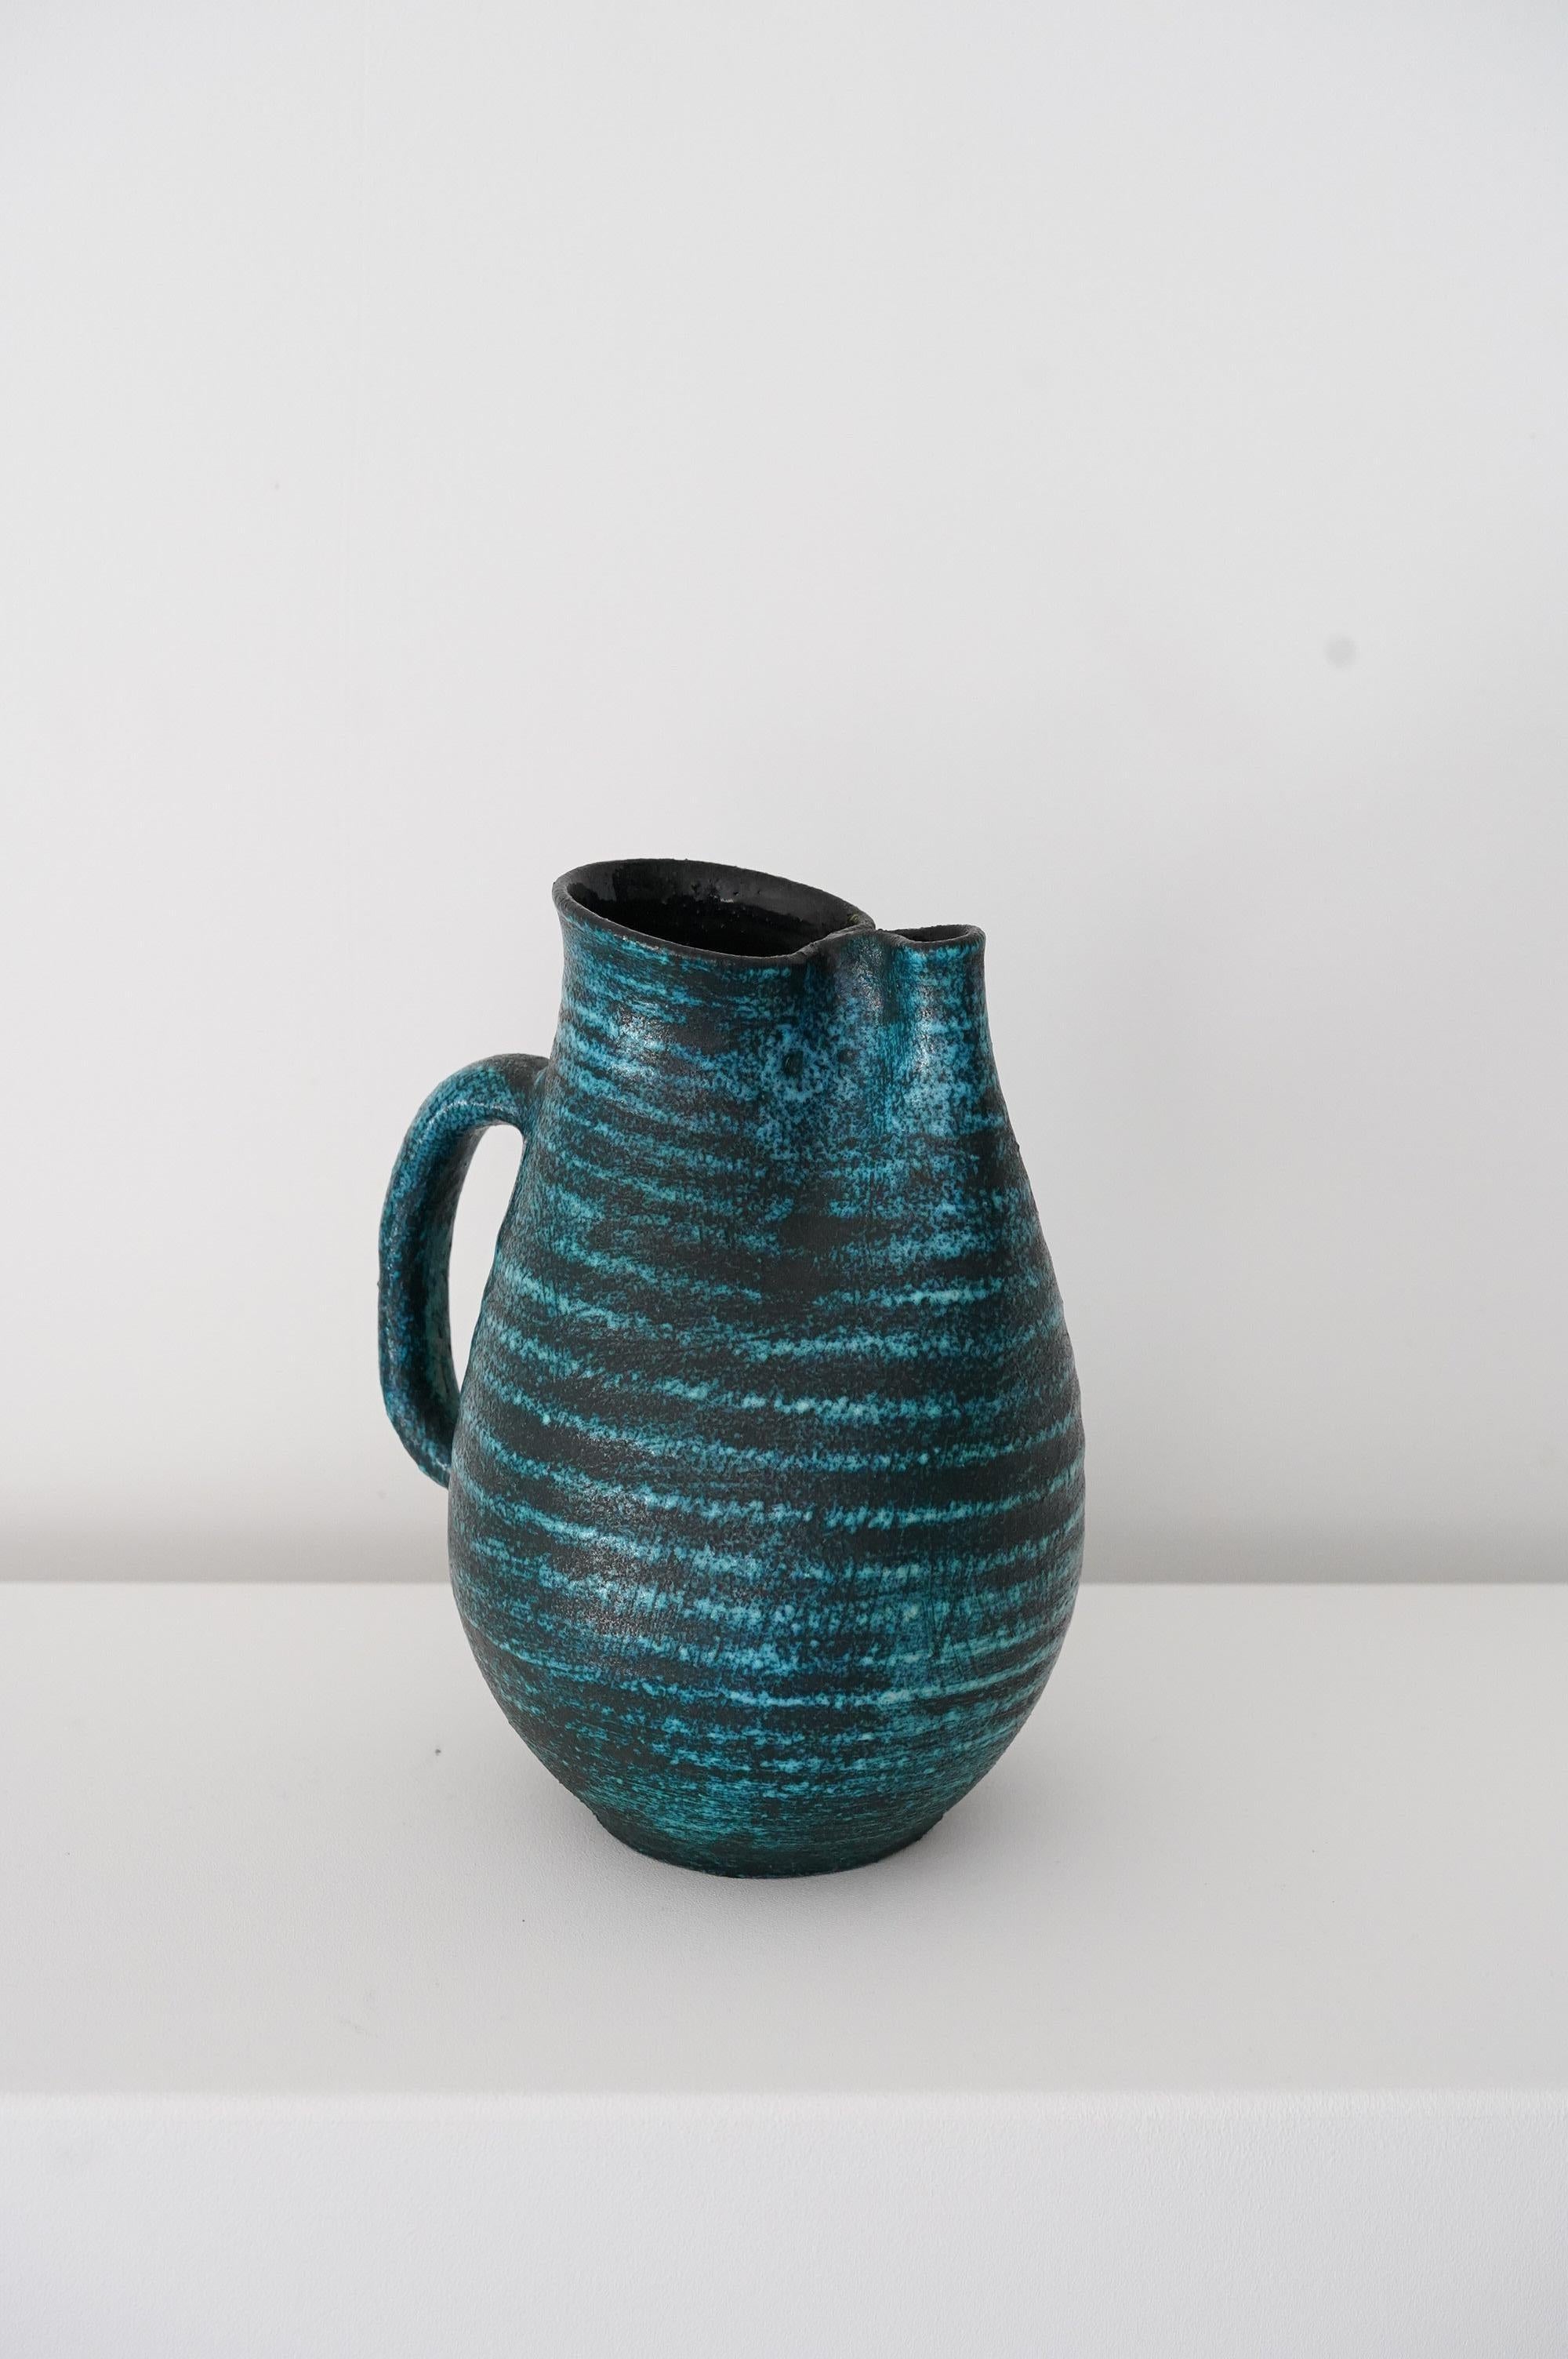 Accolay Freeform Blue Ceramic Pitcher, France 1950s For Sale 5